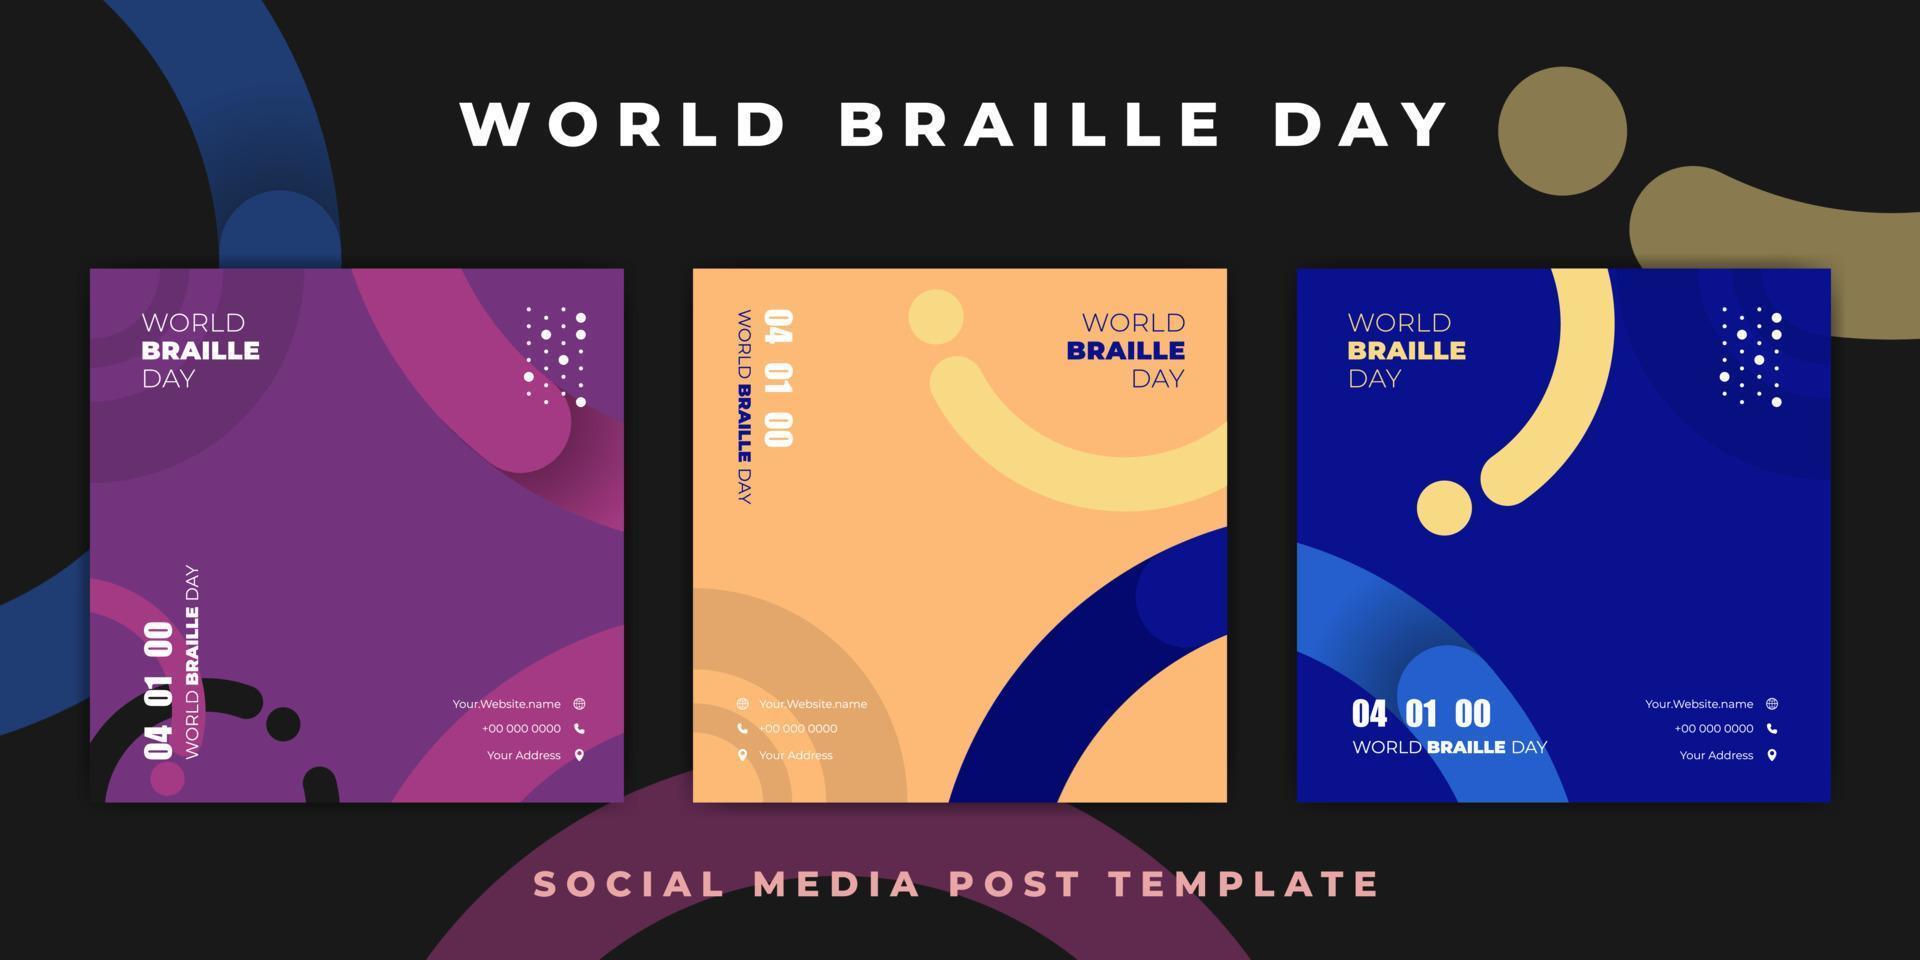 World Braille day template design. social media post template design with 3 color choices. vector